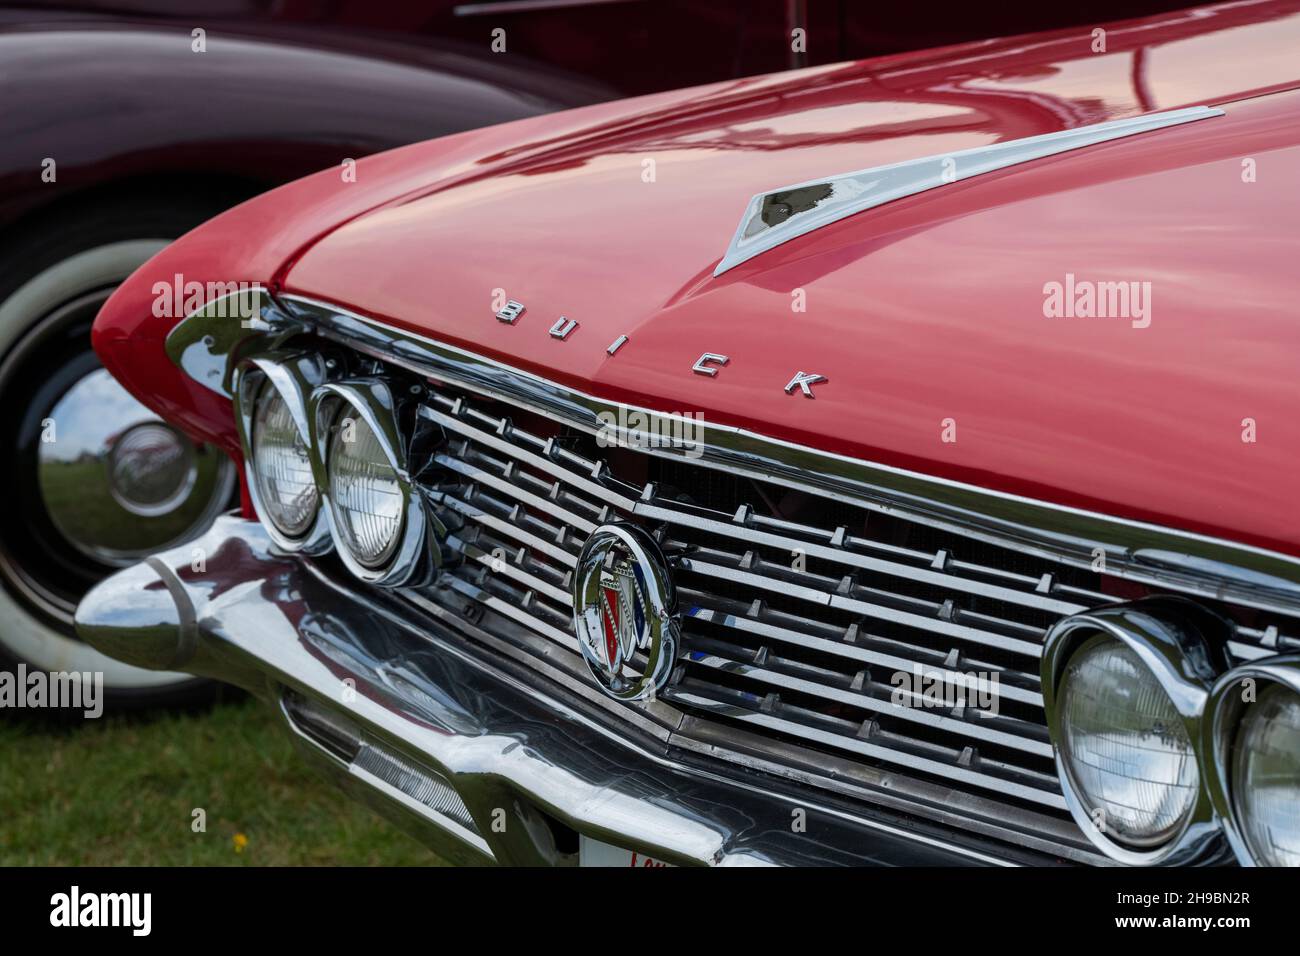 1961 Buick Le Sabre. Classic American sixties car Stock Photo